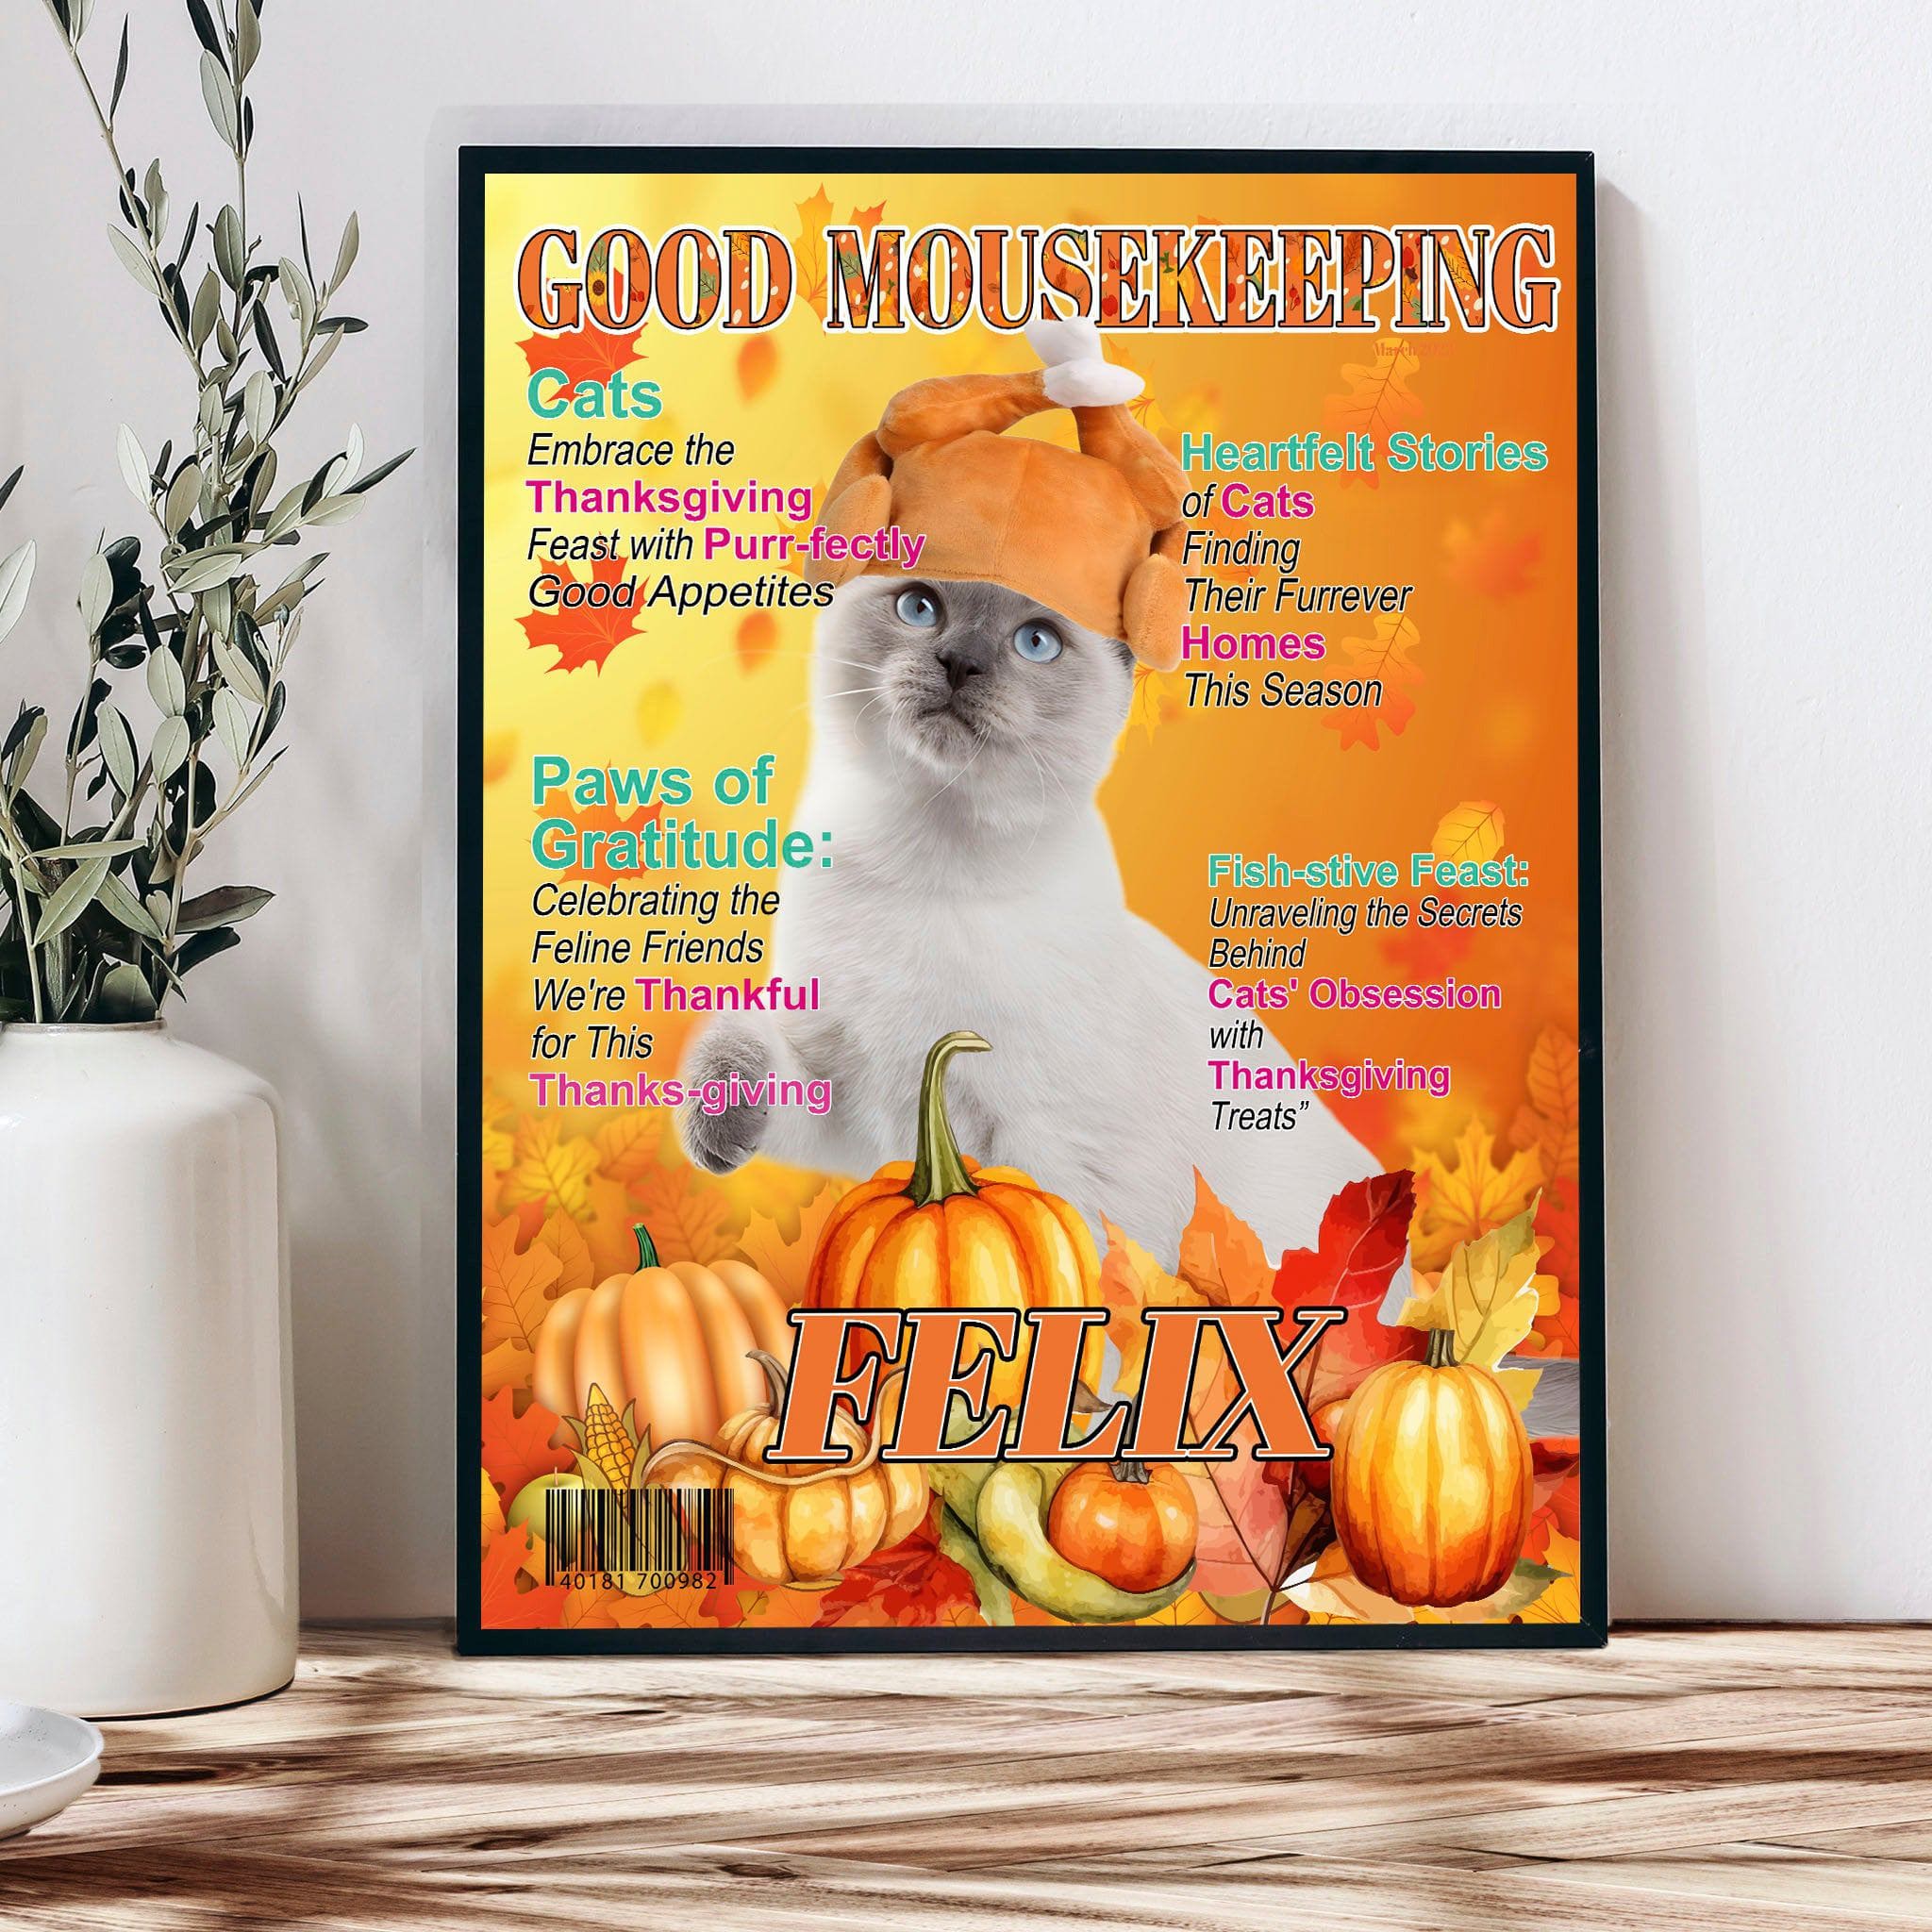 USA MADE Personalized Pet Portrait - Gift For Cat Lovers - Good Mousekeeping Thanksgiving Magazine - Personalized Pet Poster Canvas Print - Digital Download